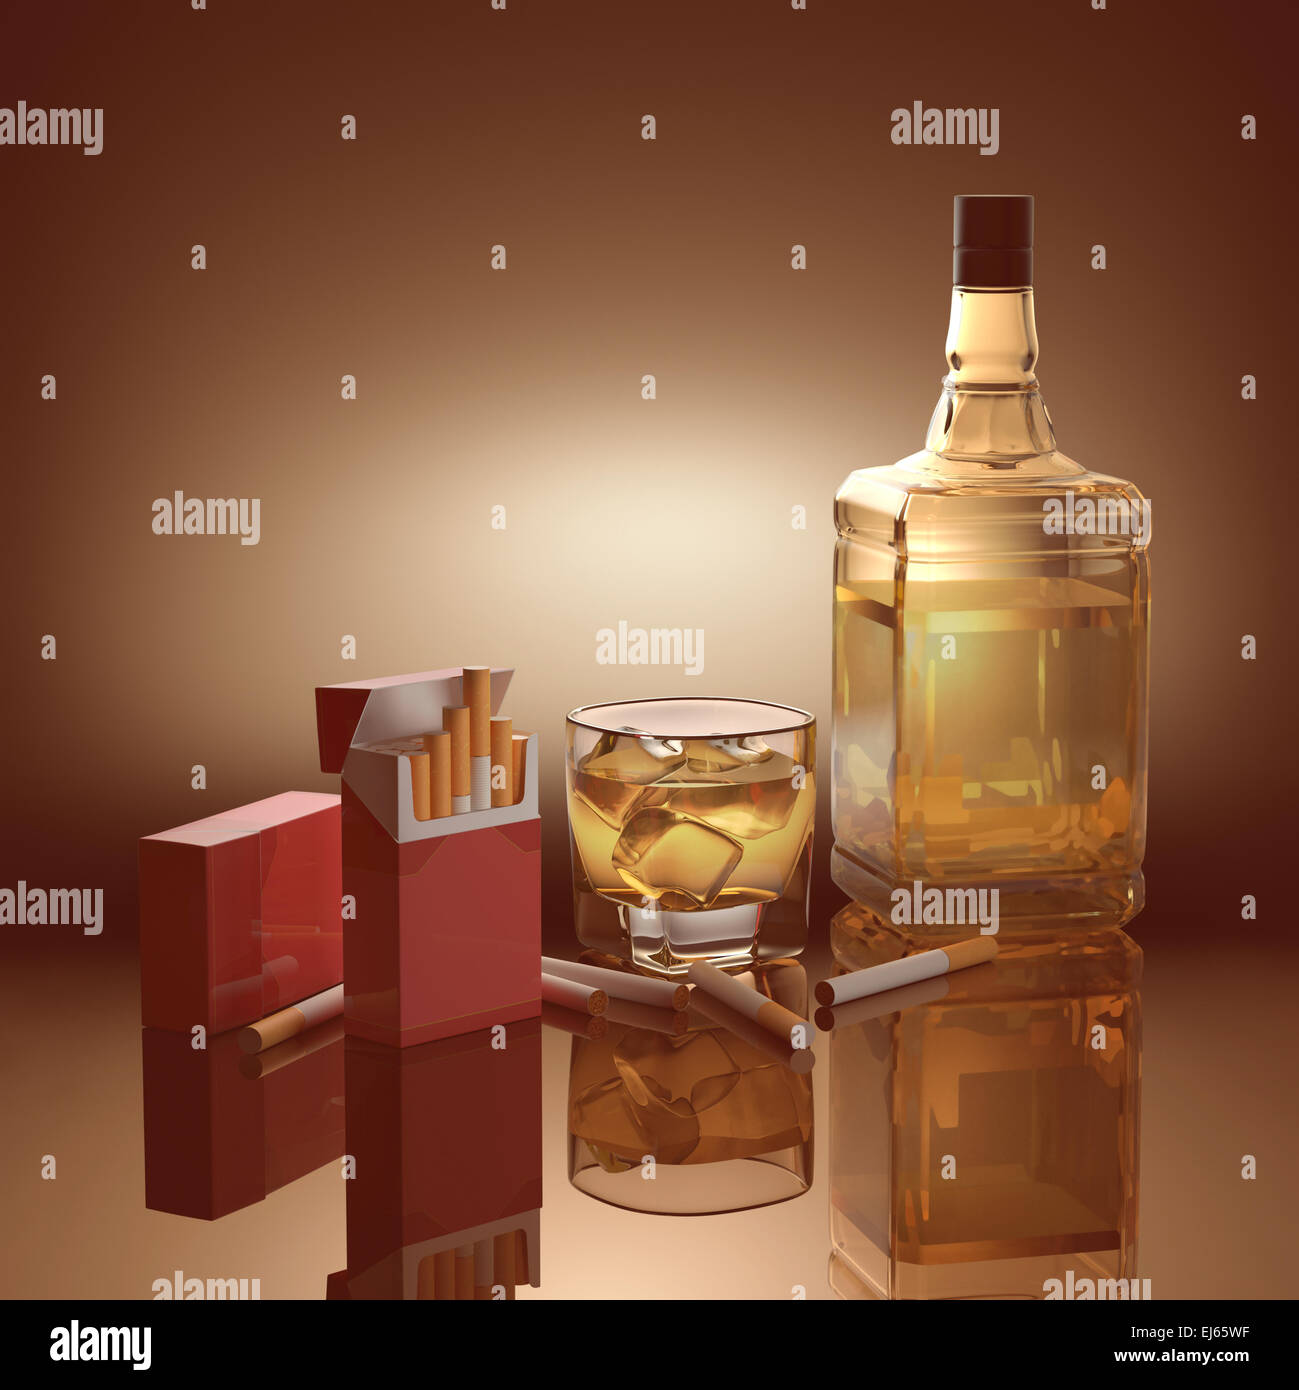 Objects concepts of addiction, drinking and smoking. Clipping path included. Stock Photo